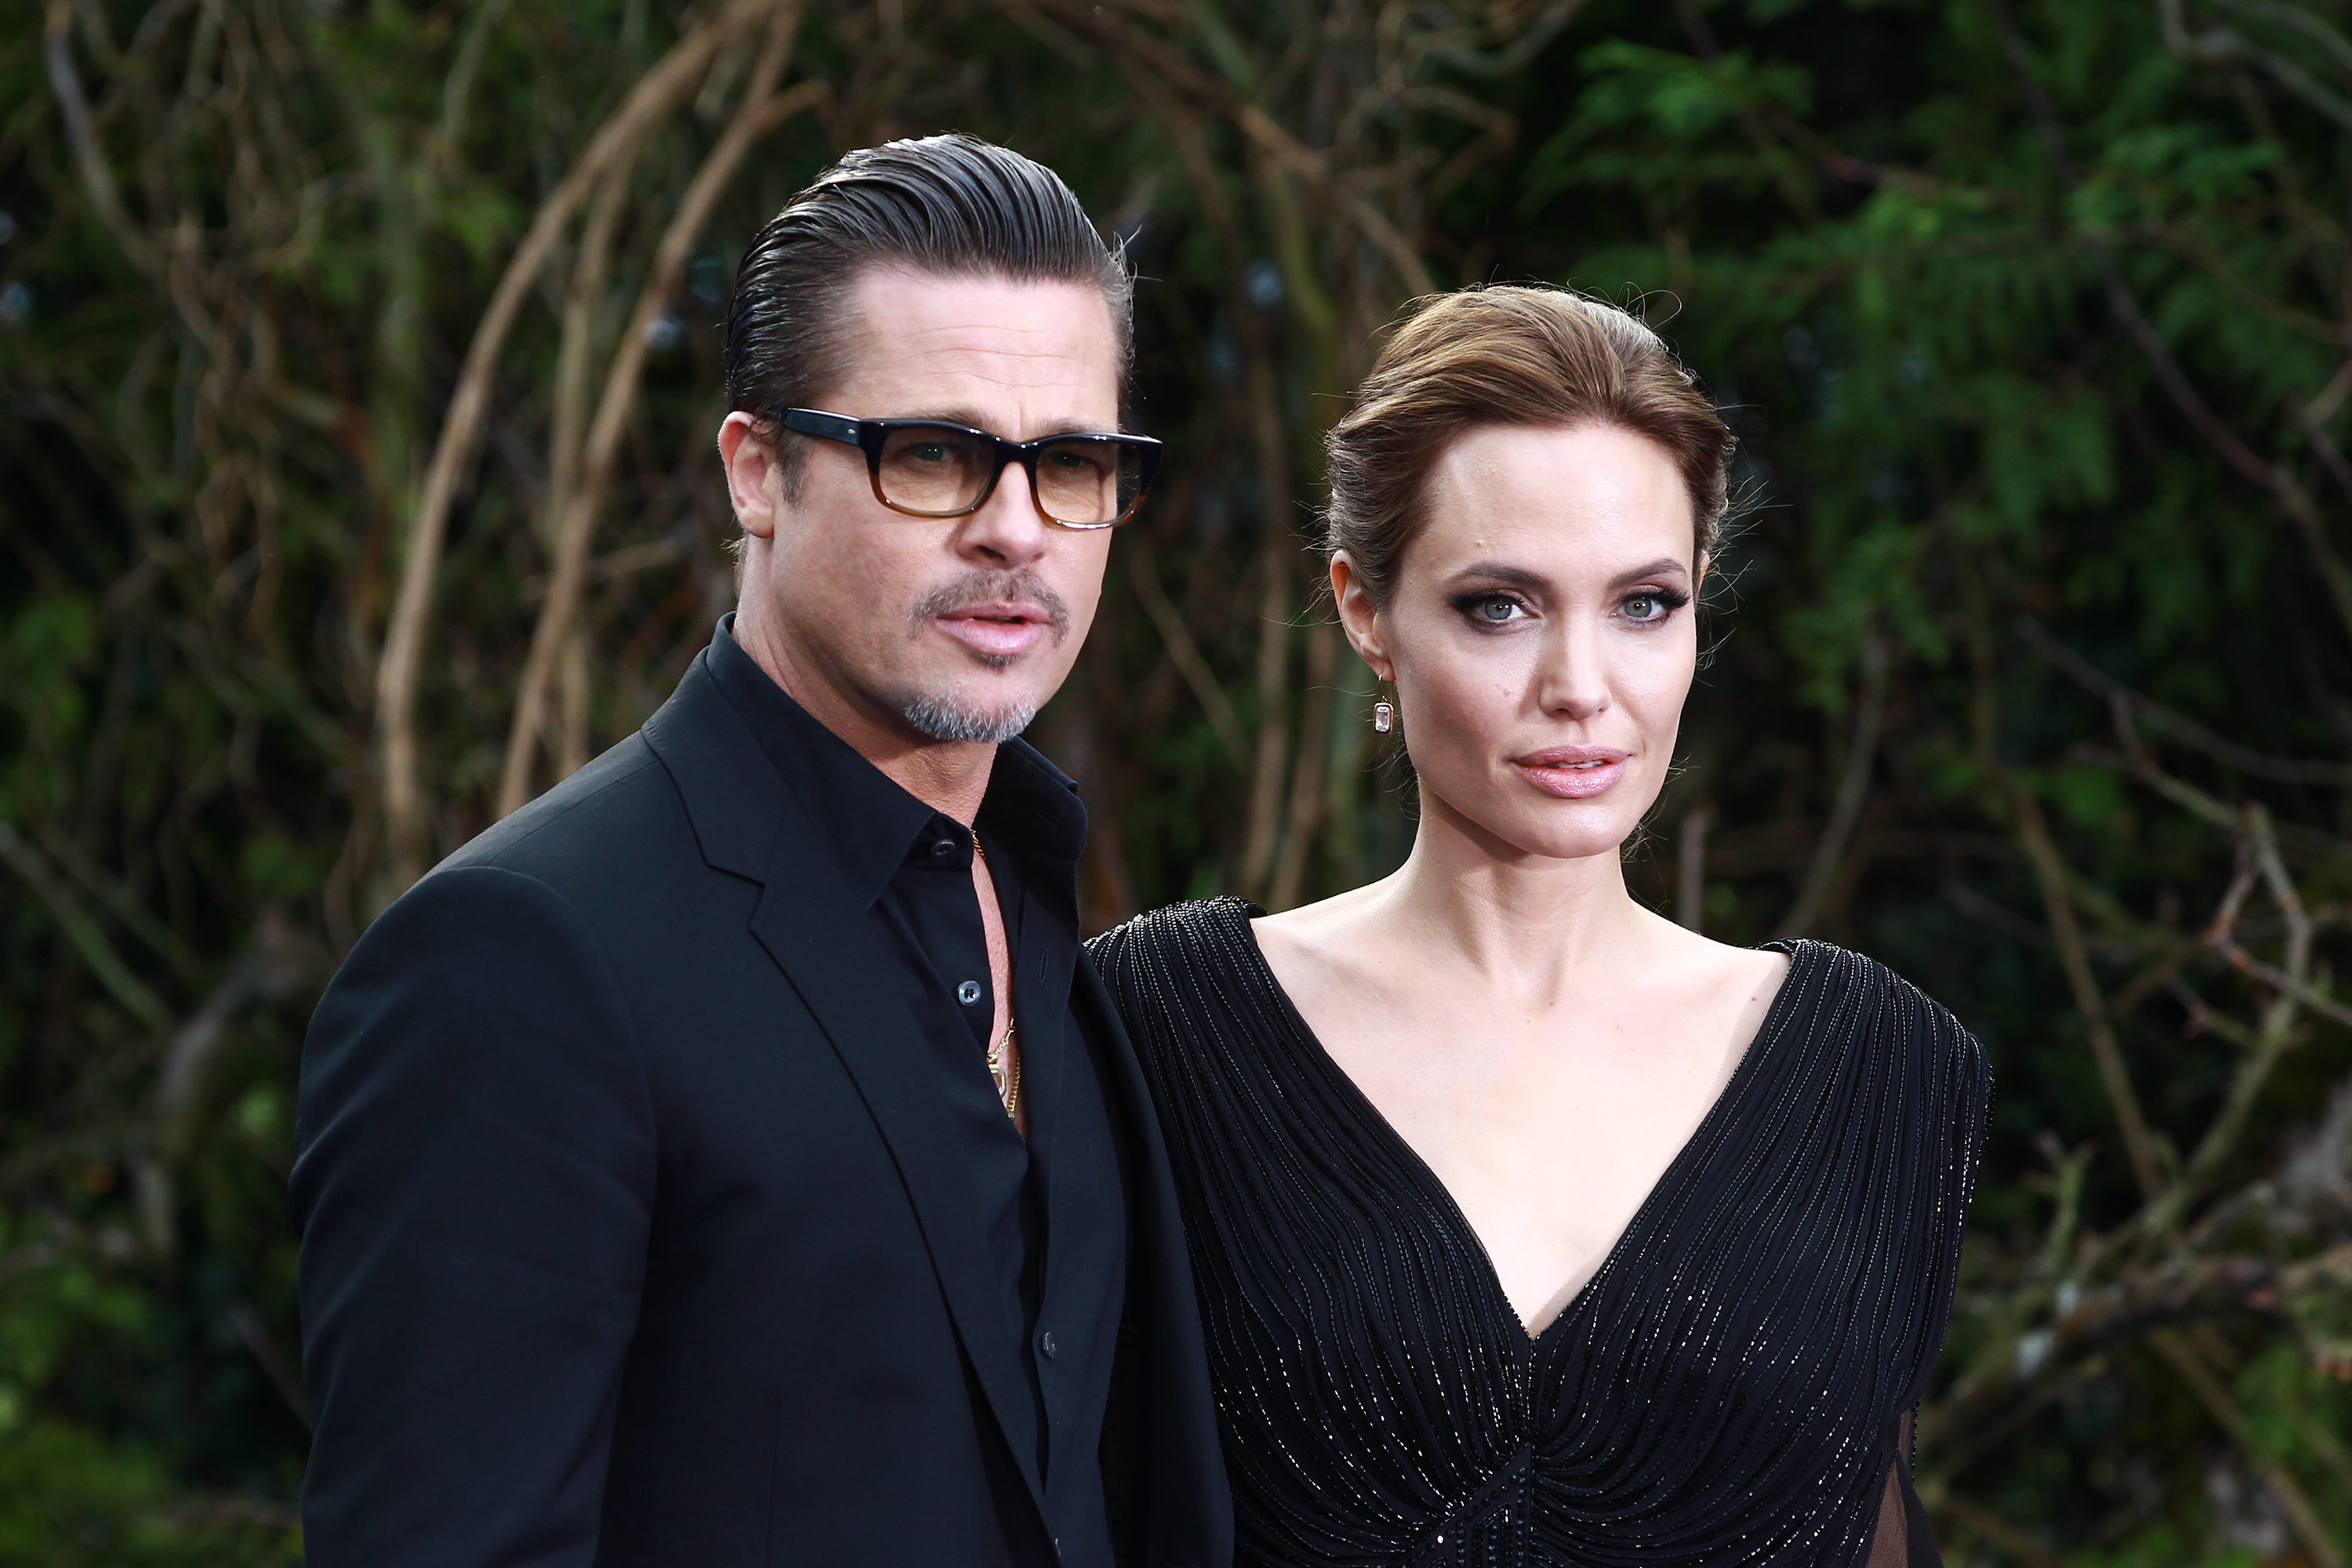 Brad and Angelina posing together for picture at an event